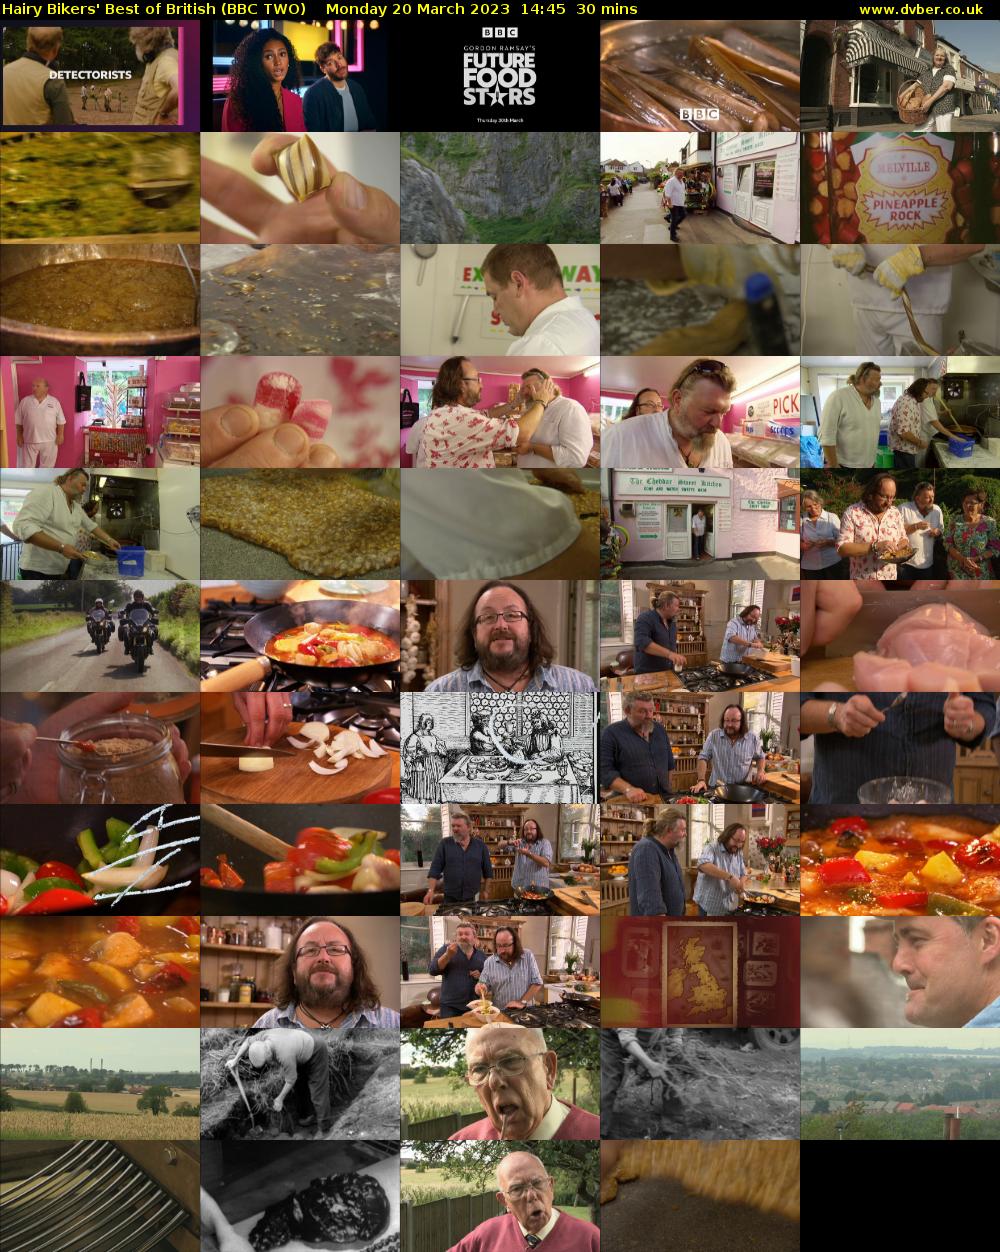 Hairy Bikers' Best of British (BBC TWO) Monday 20 March 2023 14:45 - 15:15